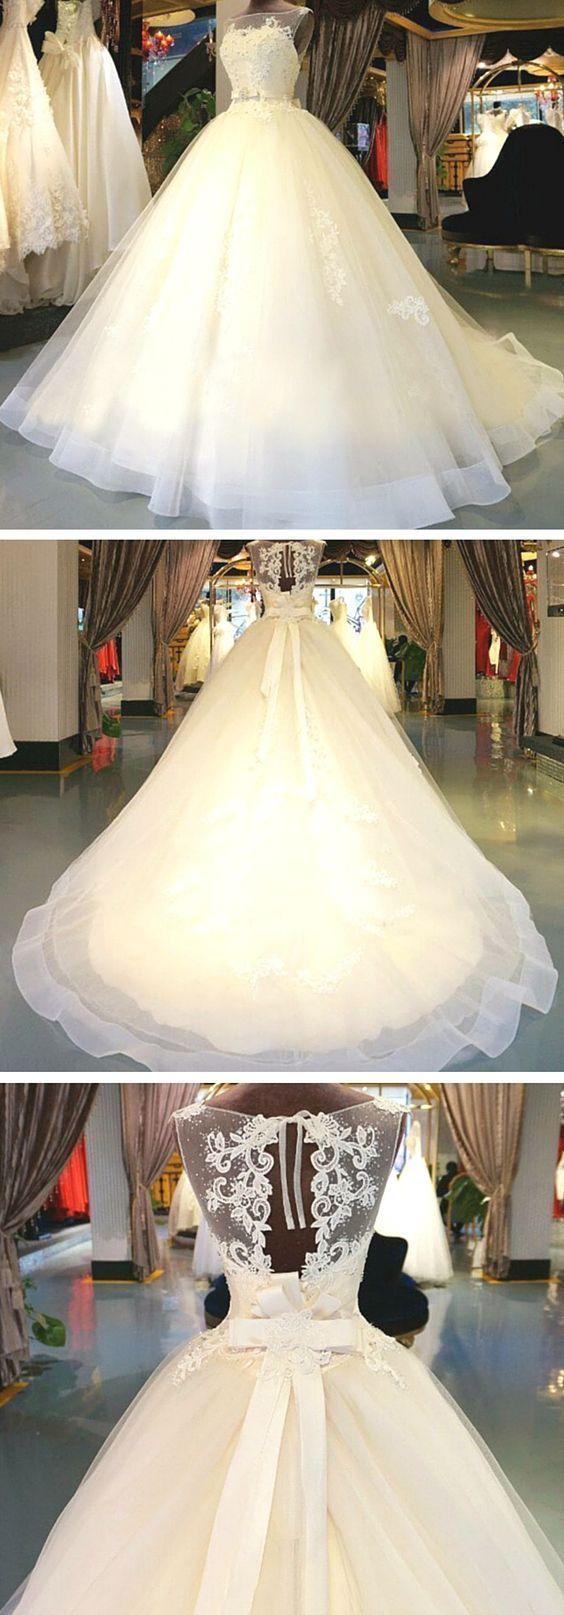 Mariage - Princess Ball Gown White Tulle Skirt Lace Bodice Wedding Gowns Wedding Dresses Unique Wedding Dress Bride Gowns